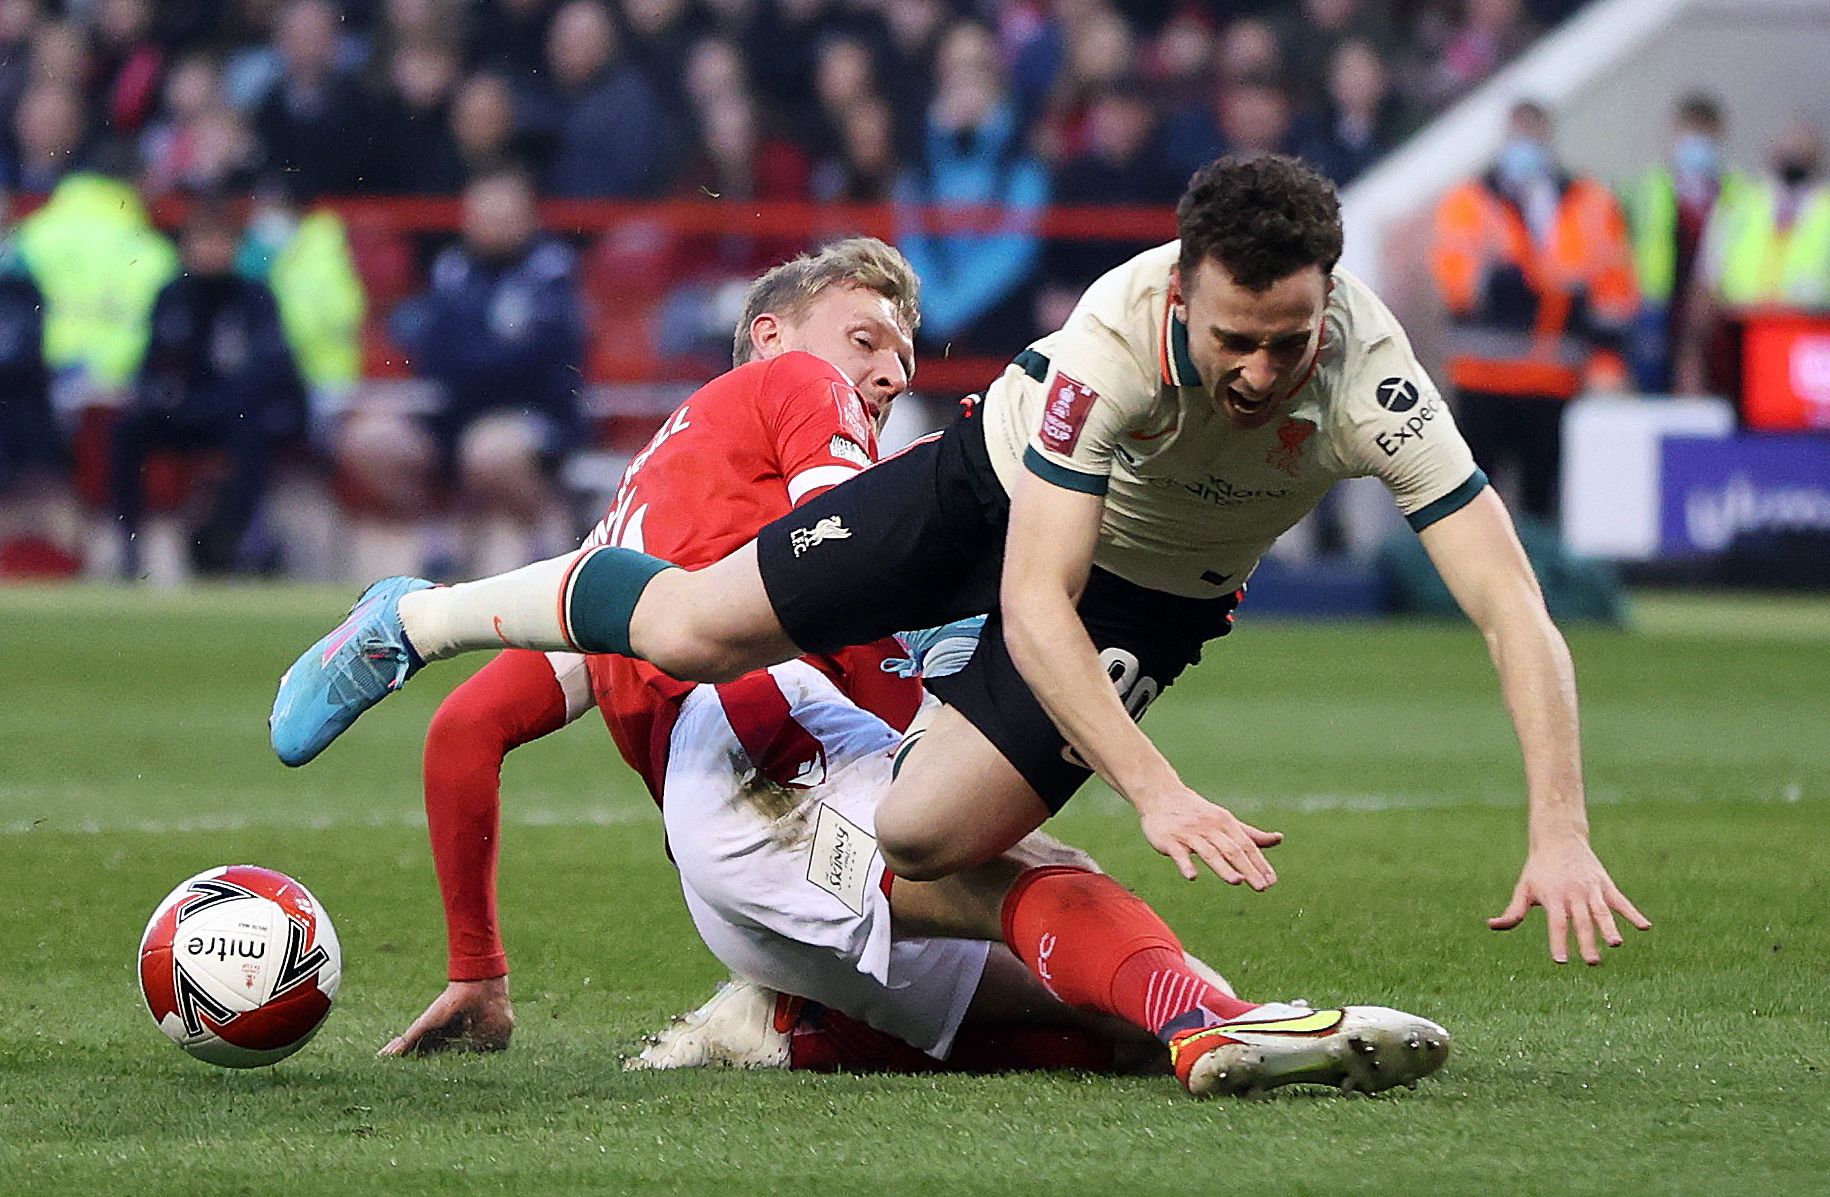 Soccer Football - FA Cup Quarter Final - Nottingham Forest v Liverpool - The City Ground, Nottingham, Britain - March 20, 2022 Nottingham Forest's Joe Worrall in action with Liverpool's Diogo Jota Action Images via Reuters/Molly Darlington